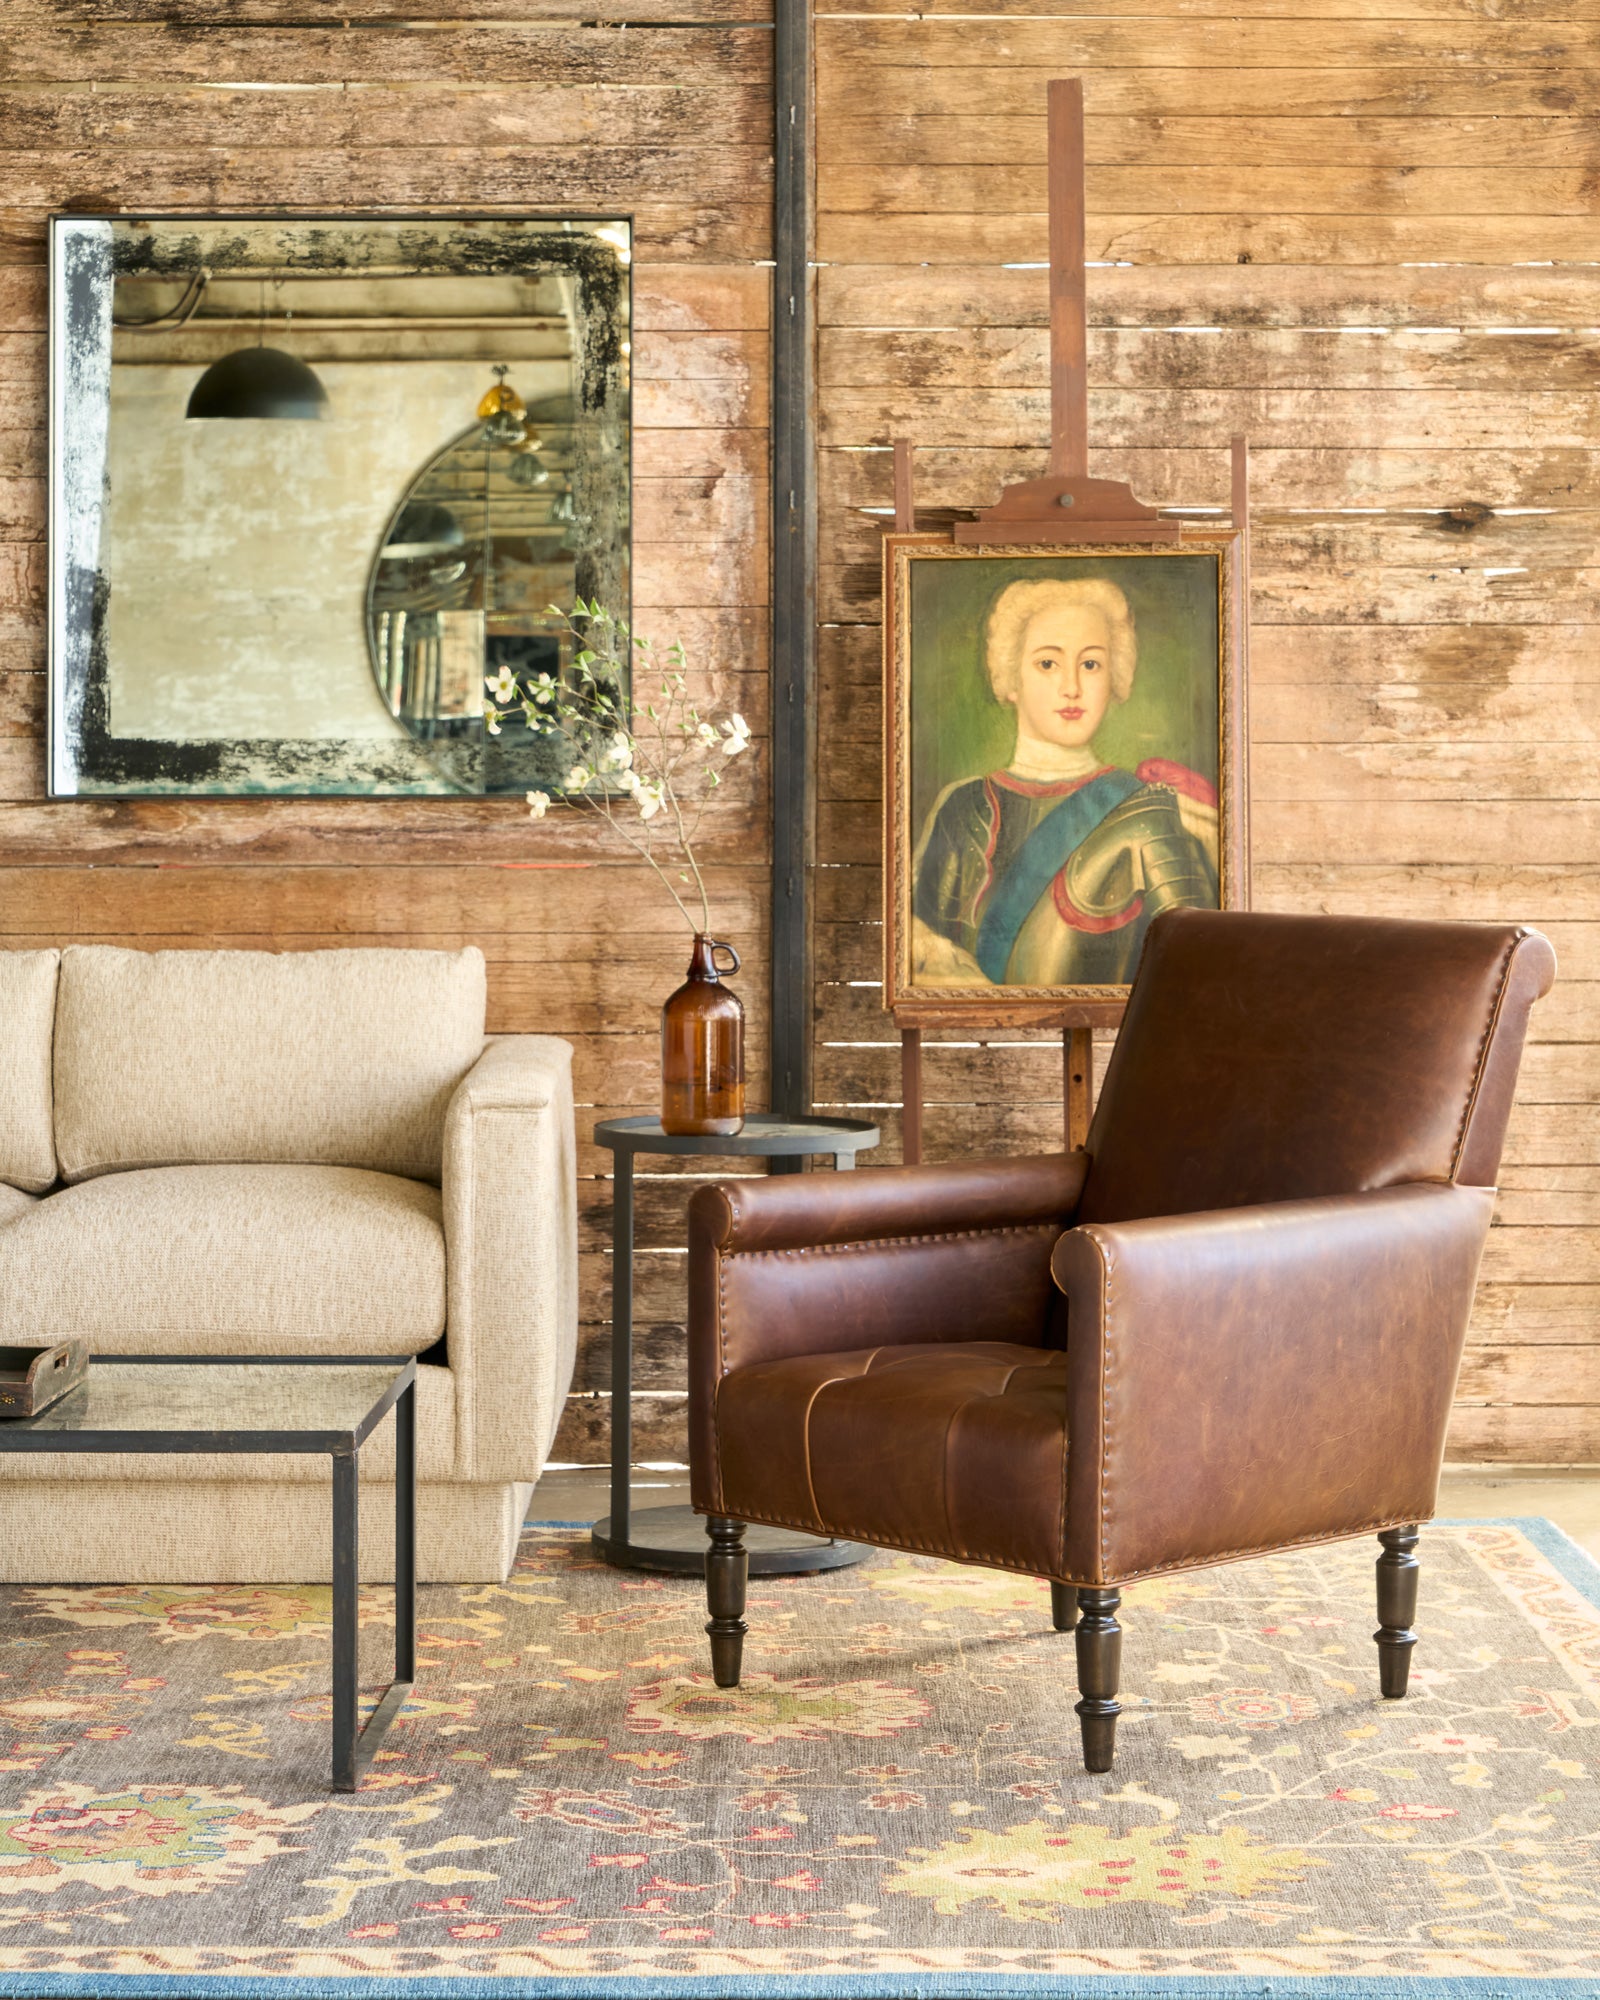  Brown leather chair by a sofa in front of a mirror and a painting of a woman on an easel. Photographed in Spur Chocolate. 